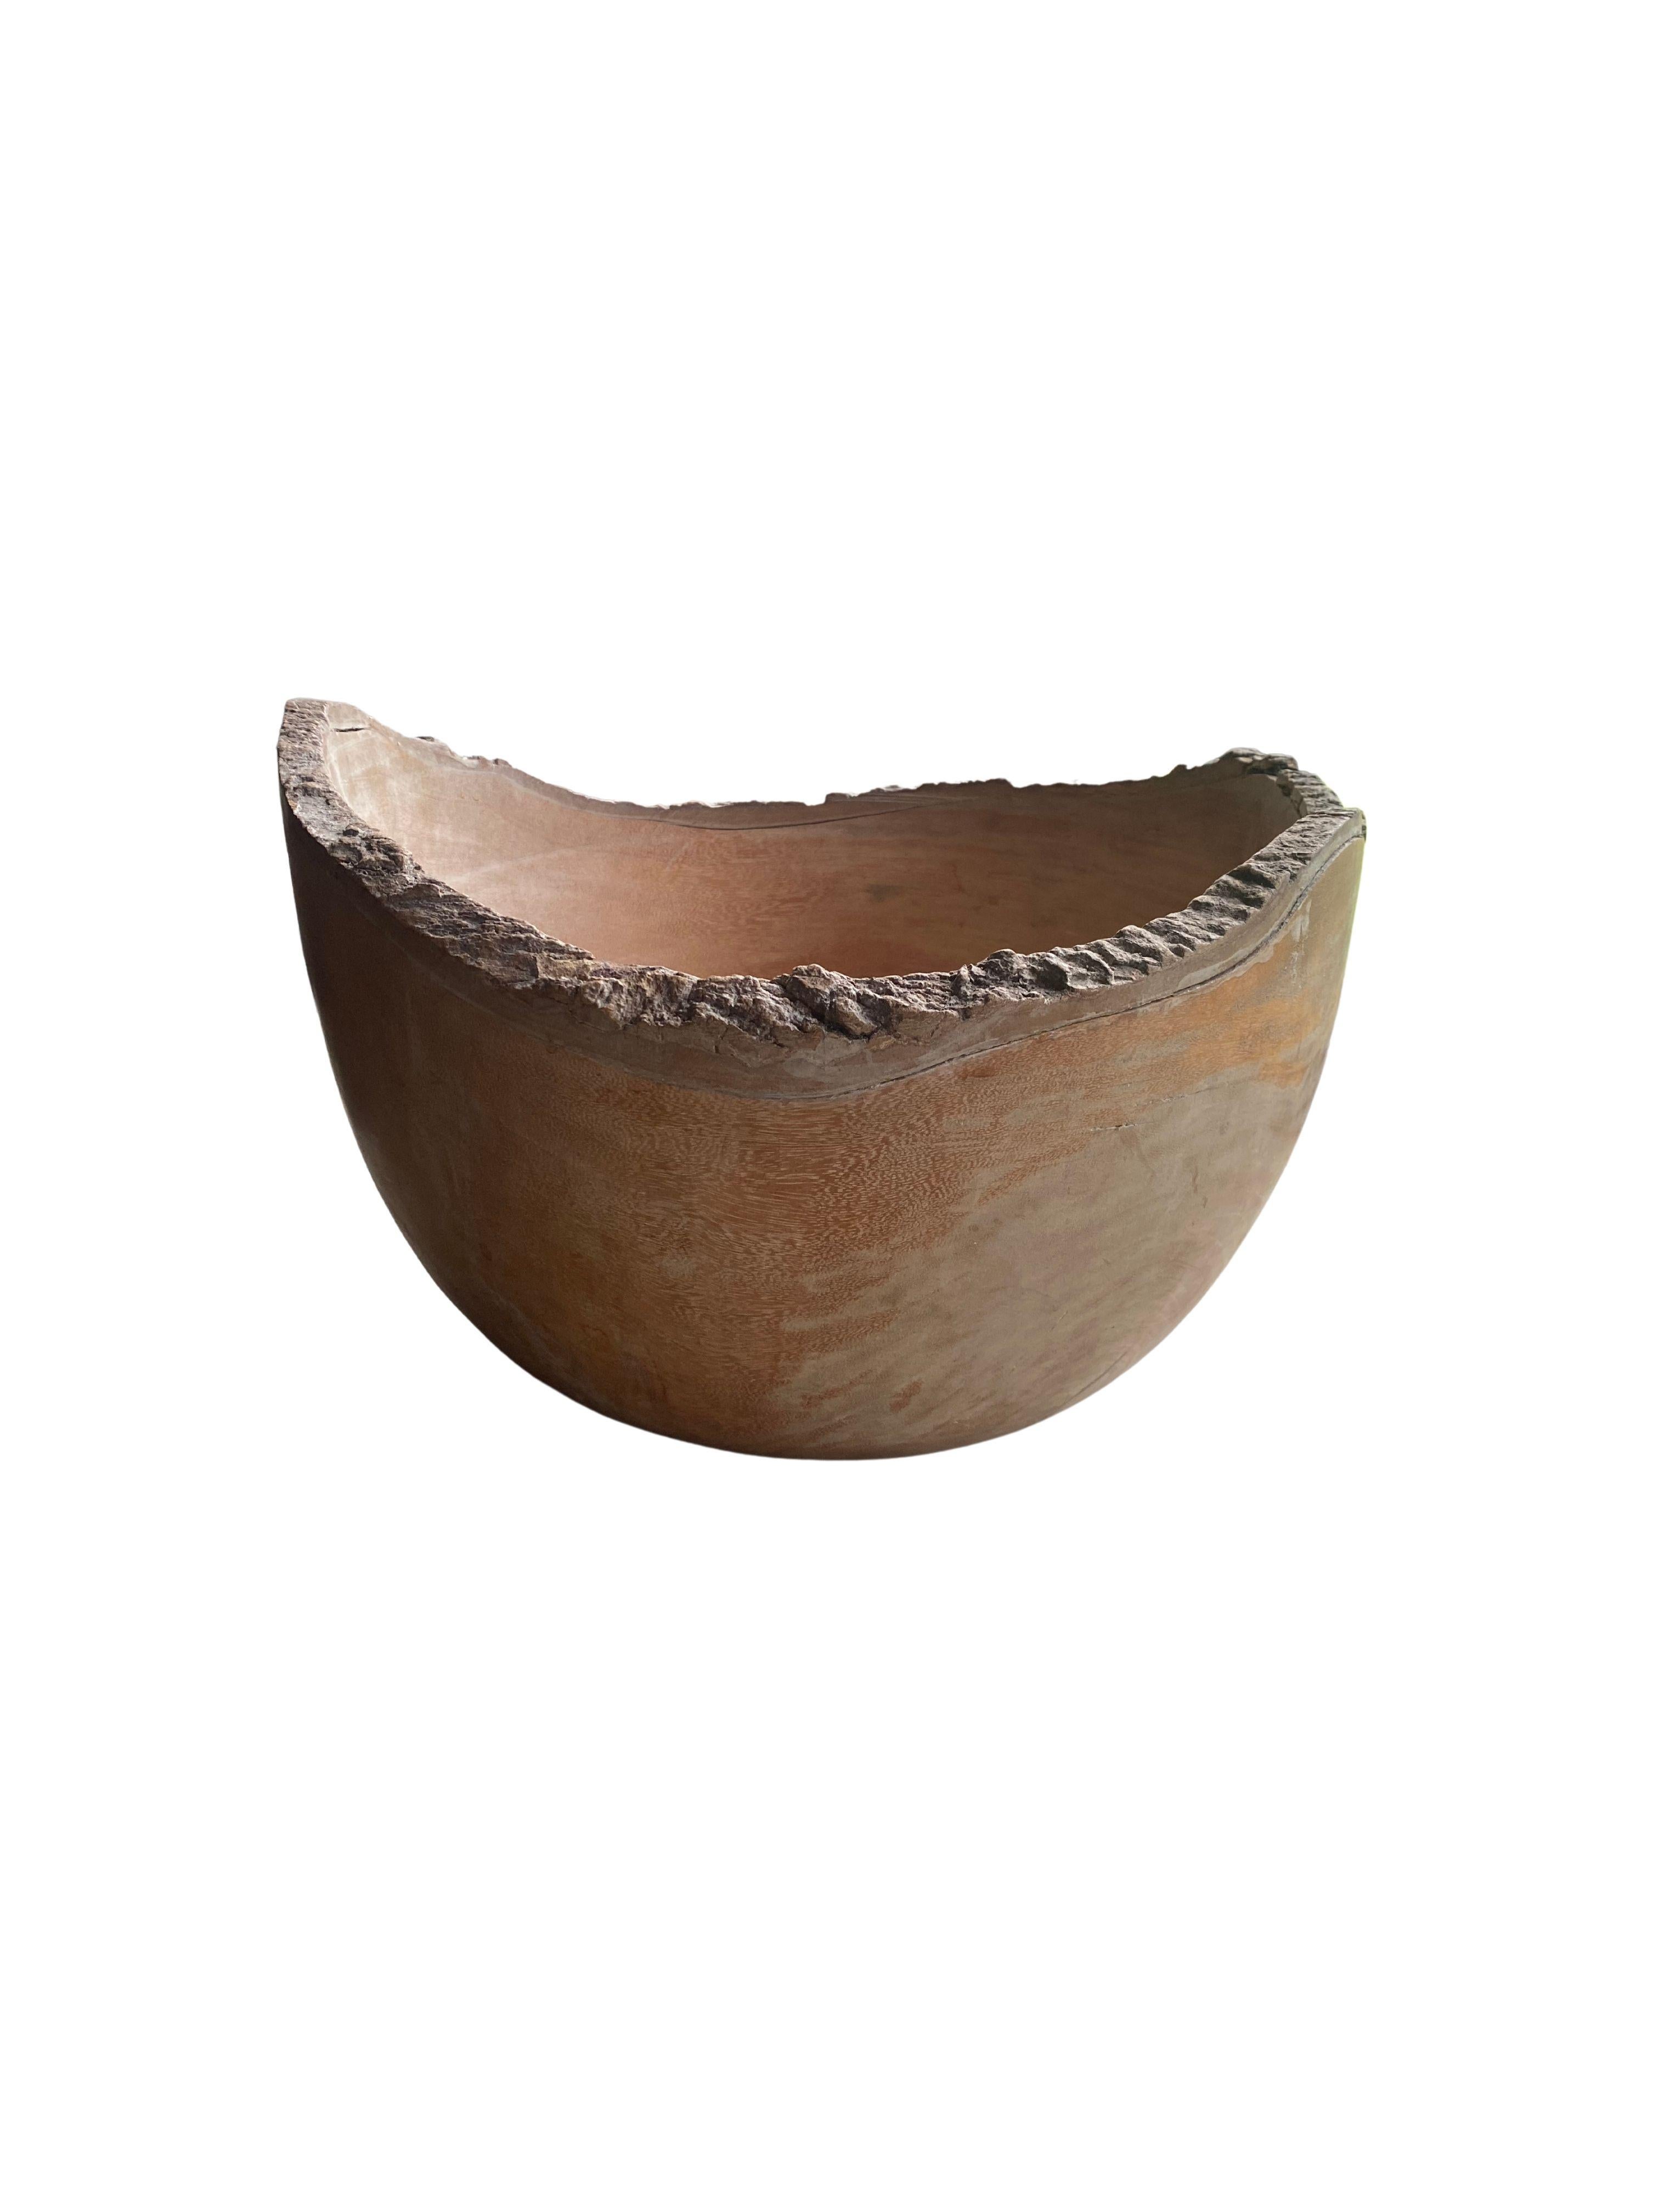 A solid teak wood bowl crafted on the island of Java from a slab of burl wood.The bowl was cut from a much larger slab of wood and maintains a minimalist organic design with a range of textures. The rim still bears the outer textures of the tree.